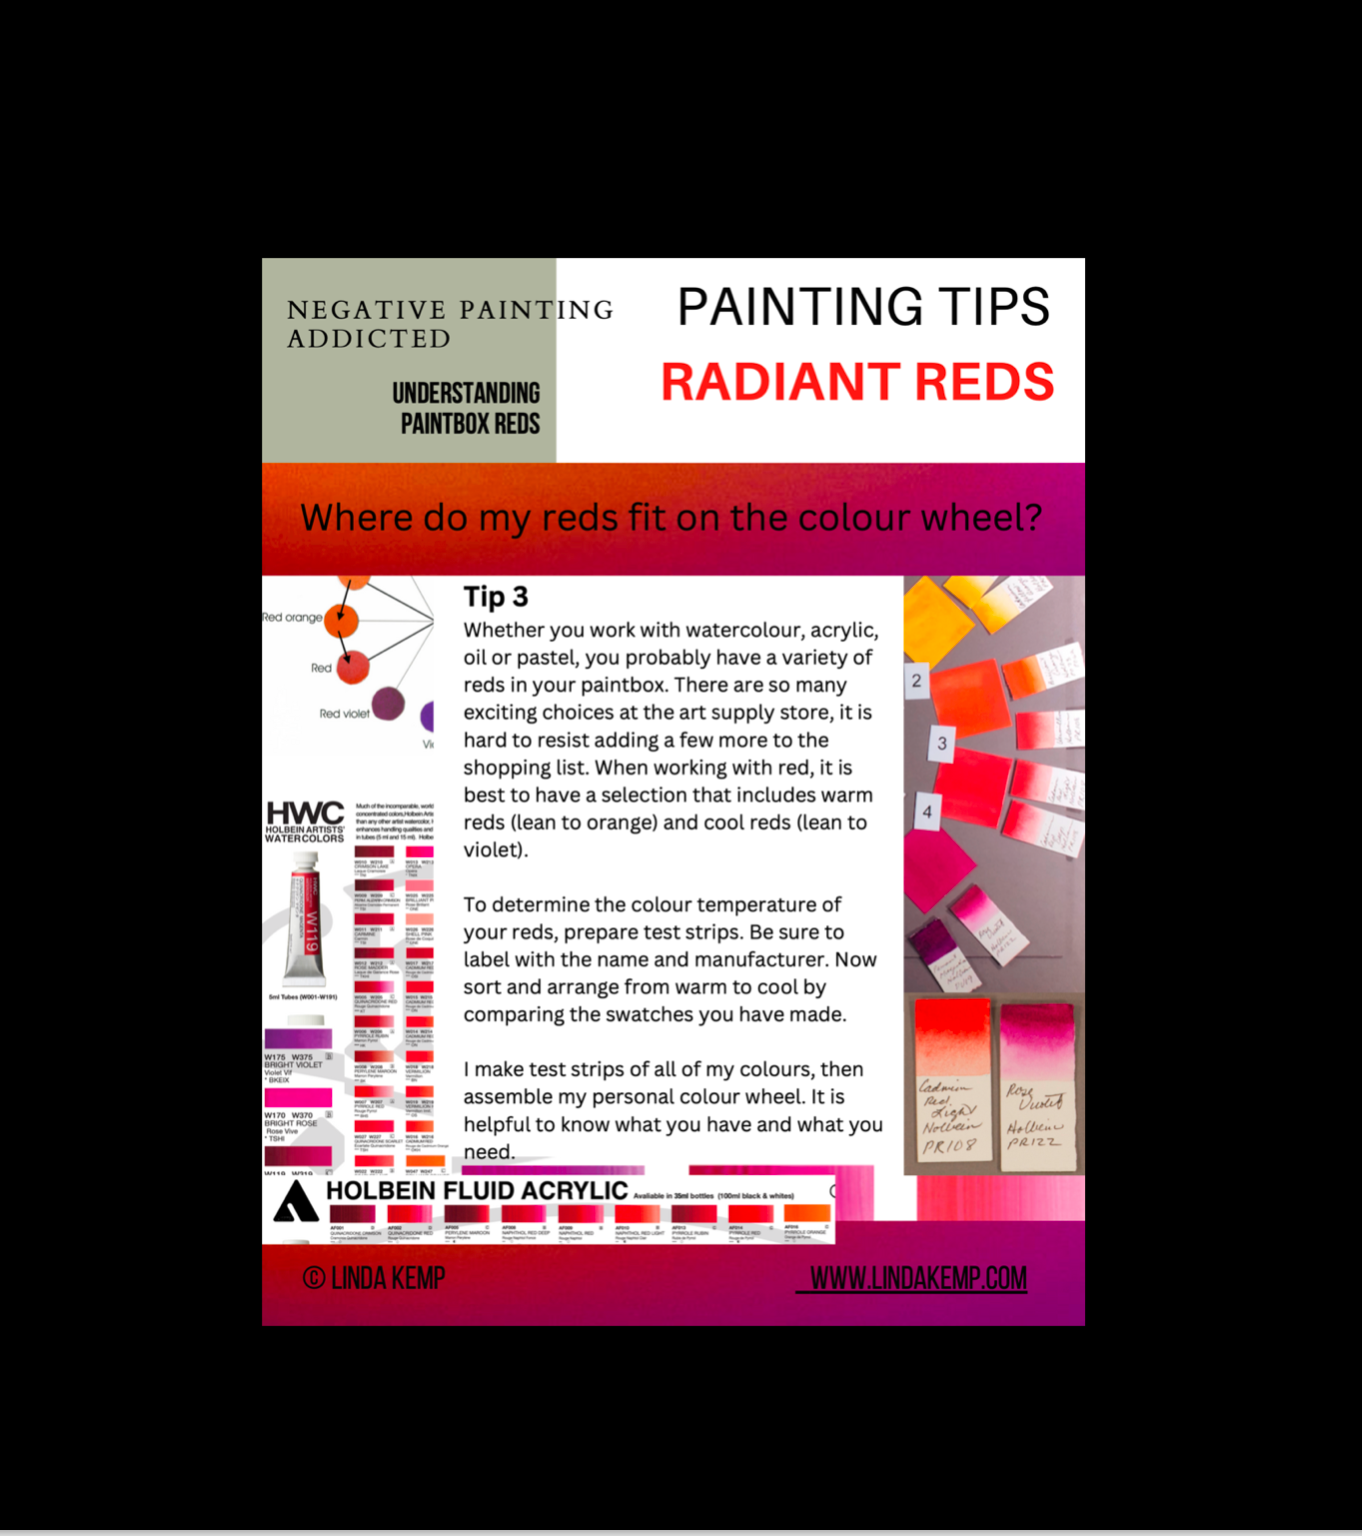 16 Tips For Painting Radiant Reds - Free Handbook